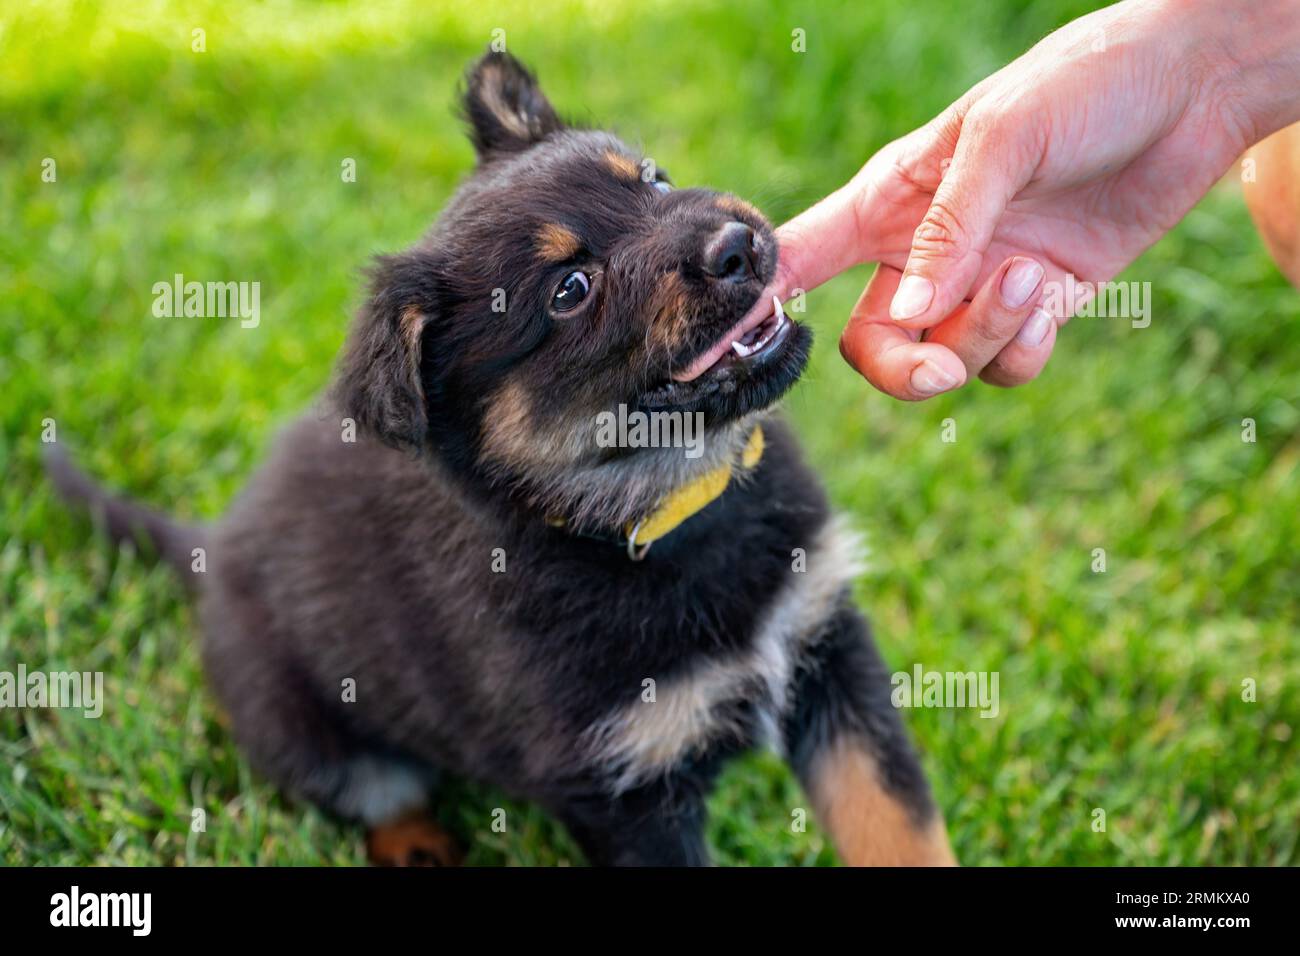 Two months old cute puppy (Bohemian shepherd) bites his mistress's hand on grass. Stock Photo